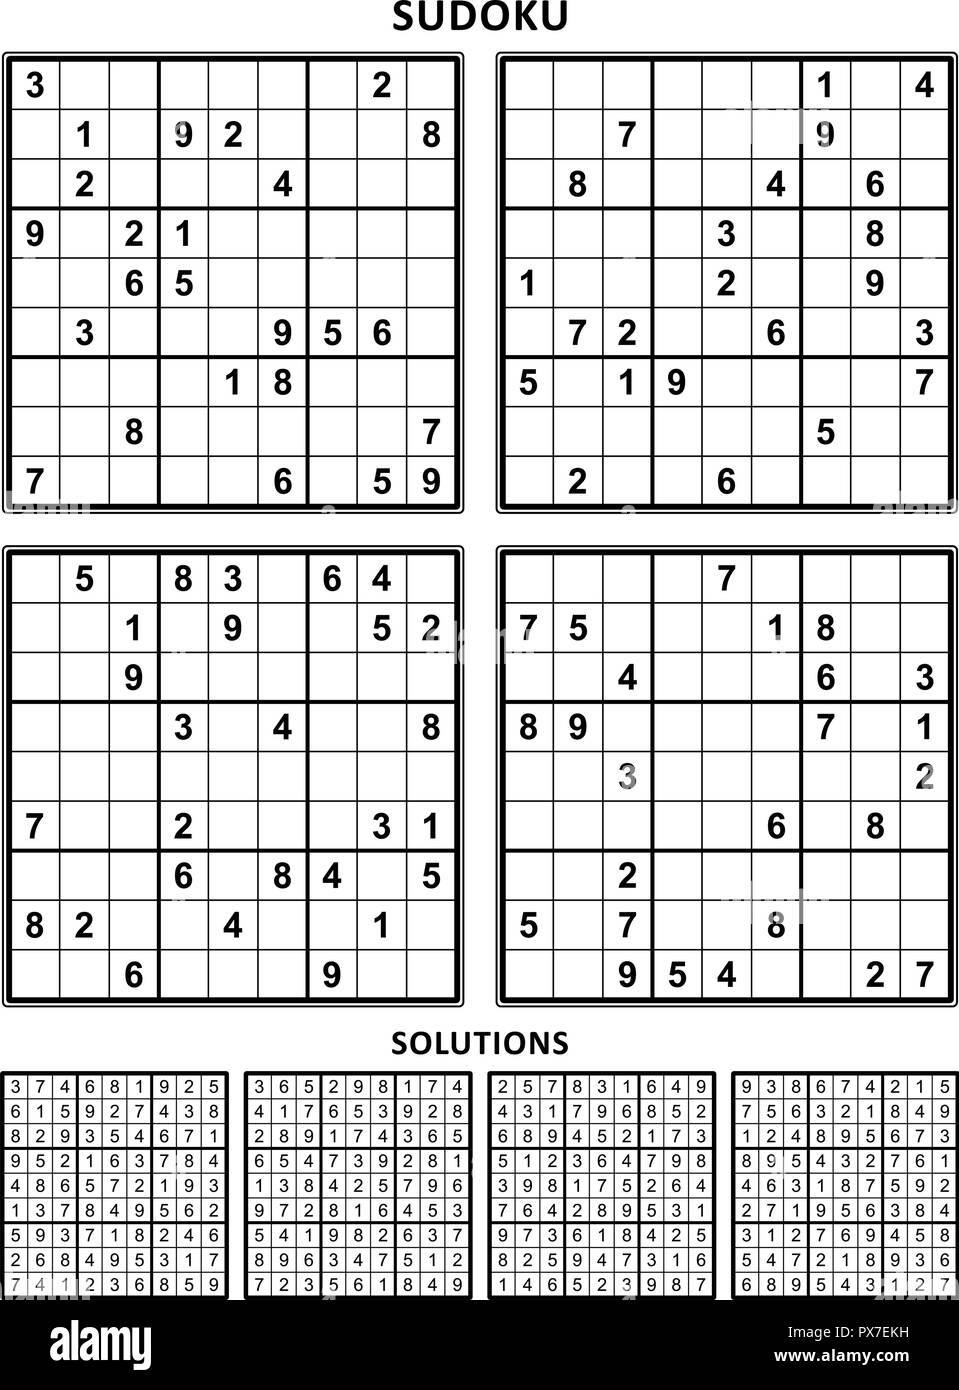 Four Sudoku Puzzles Of Comfortable easy Yet Not Very Easy Level 